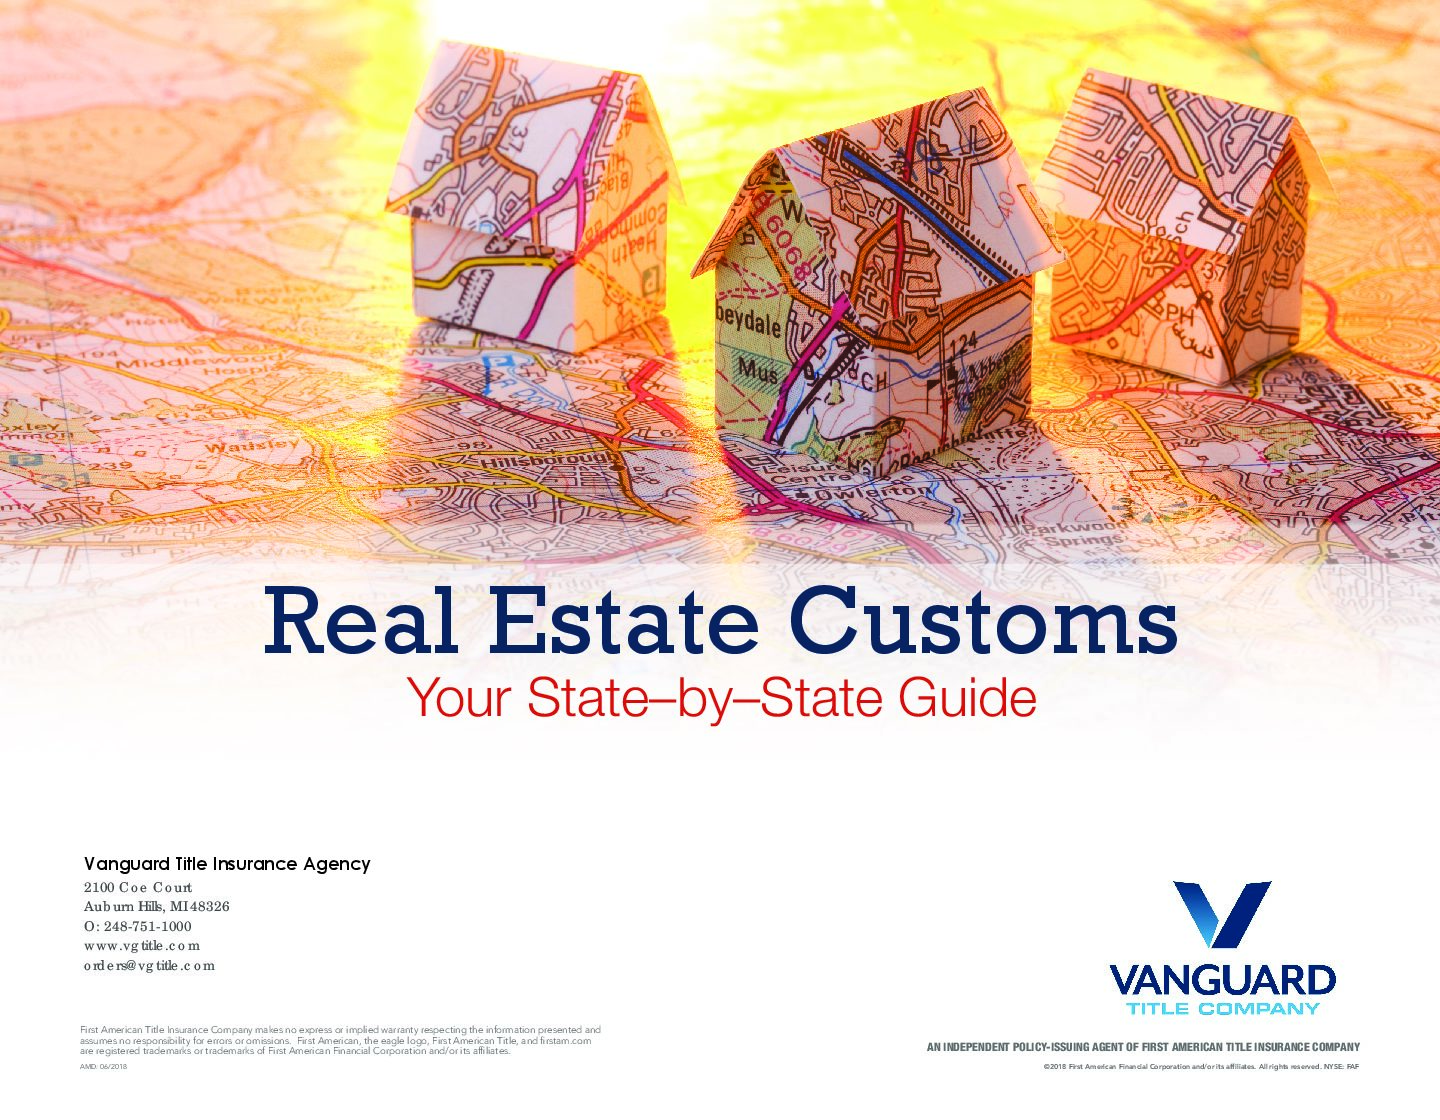 Guide to Real Estate Customs by State – Newly updated!